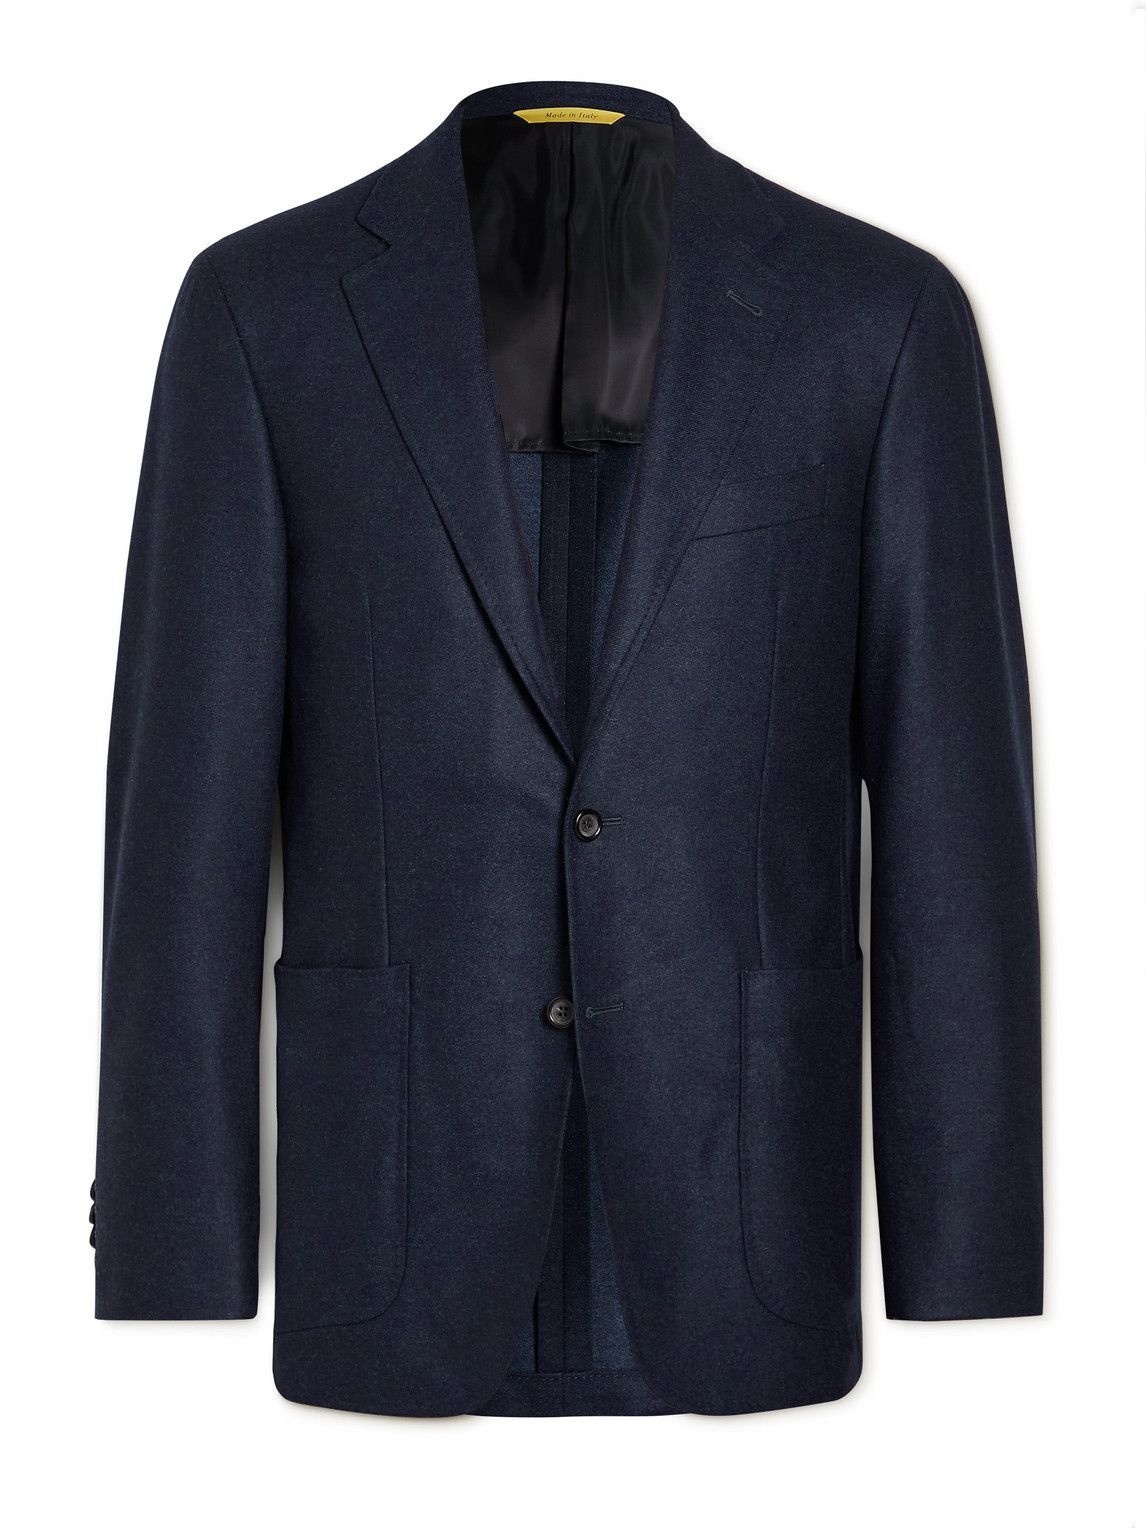 Canali - Kei Slim-Fit Wool Suit Jacket - Blue Canali